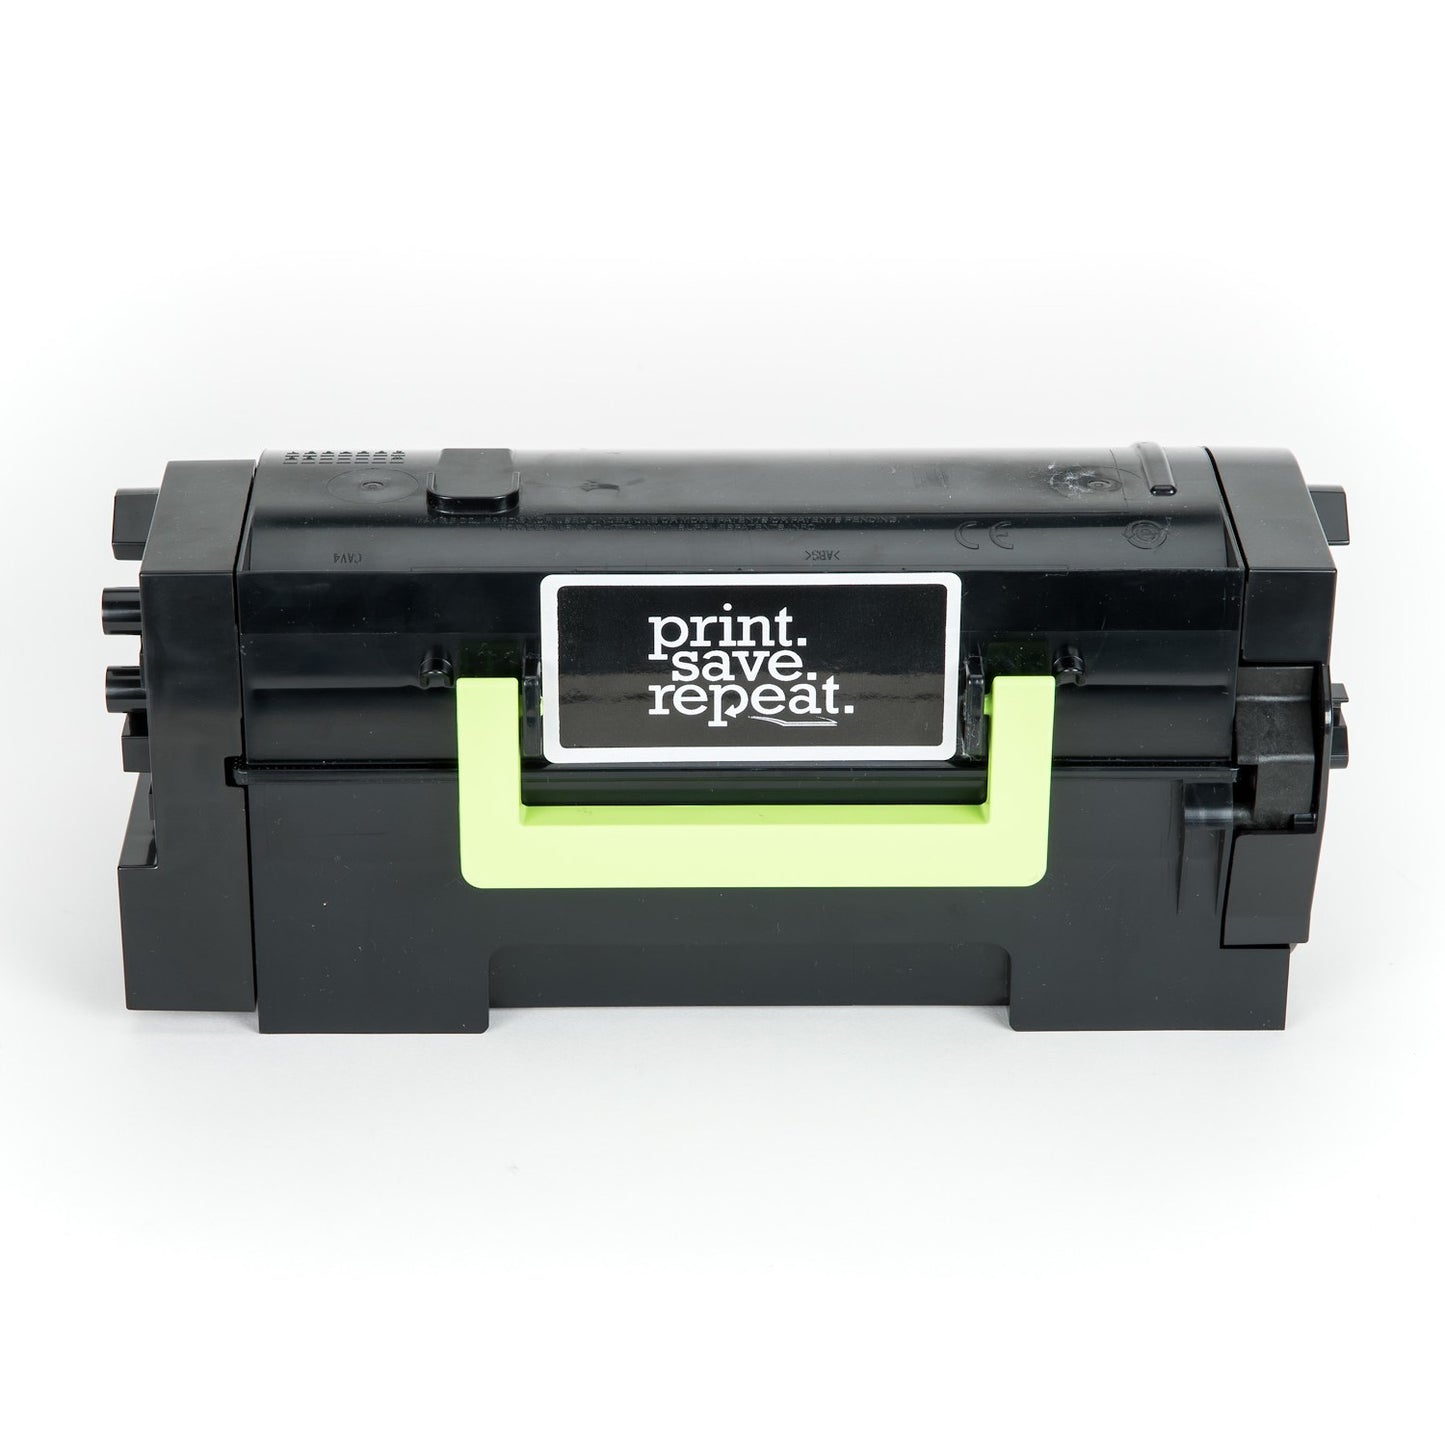 Print.Save.Repeat. Lexmark B281000 Standard Yield Remanufactured Toner Cartridge for B2865 [7,500 Pages]